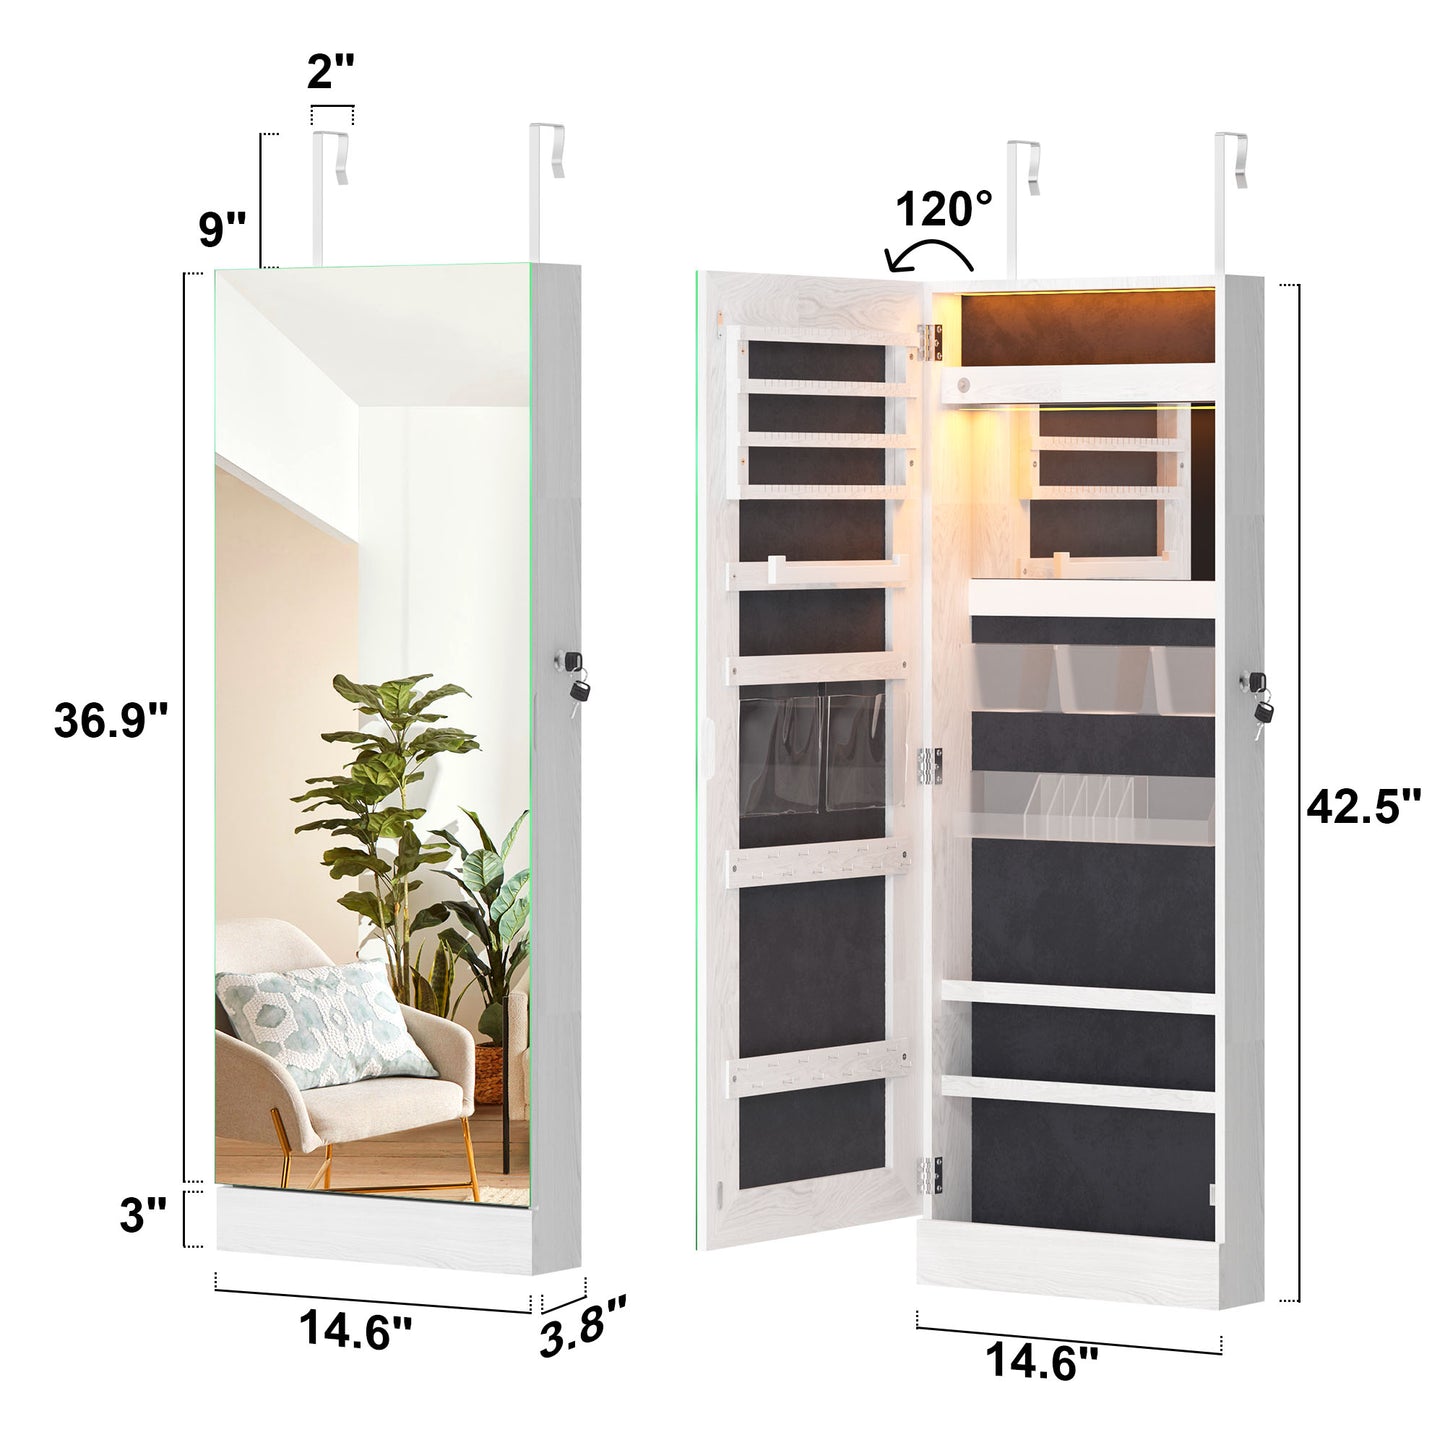 SogesPower 42.5" Wall Mirror Jewelry Cabinet with Adjusttable LED Light- White